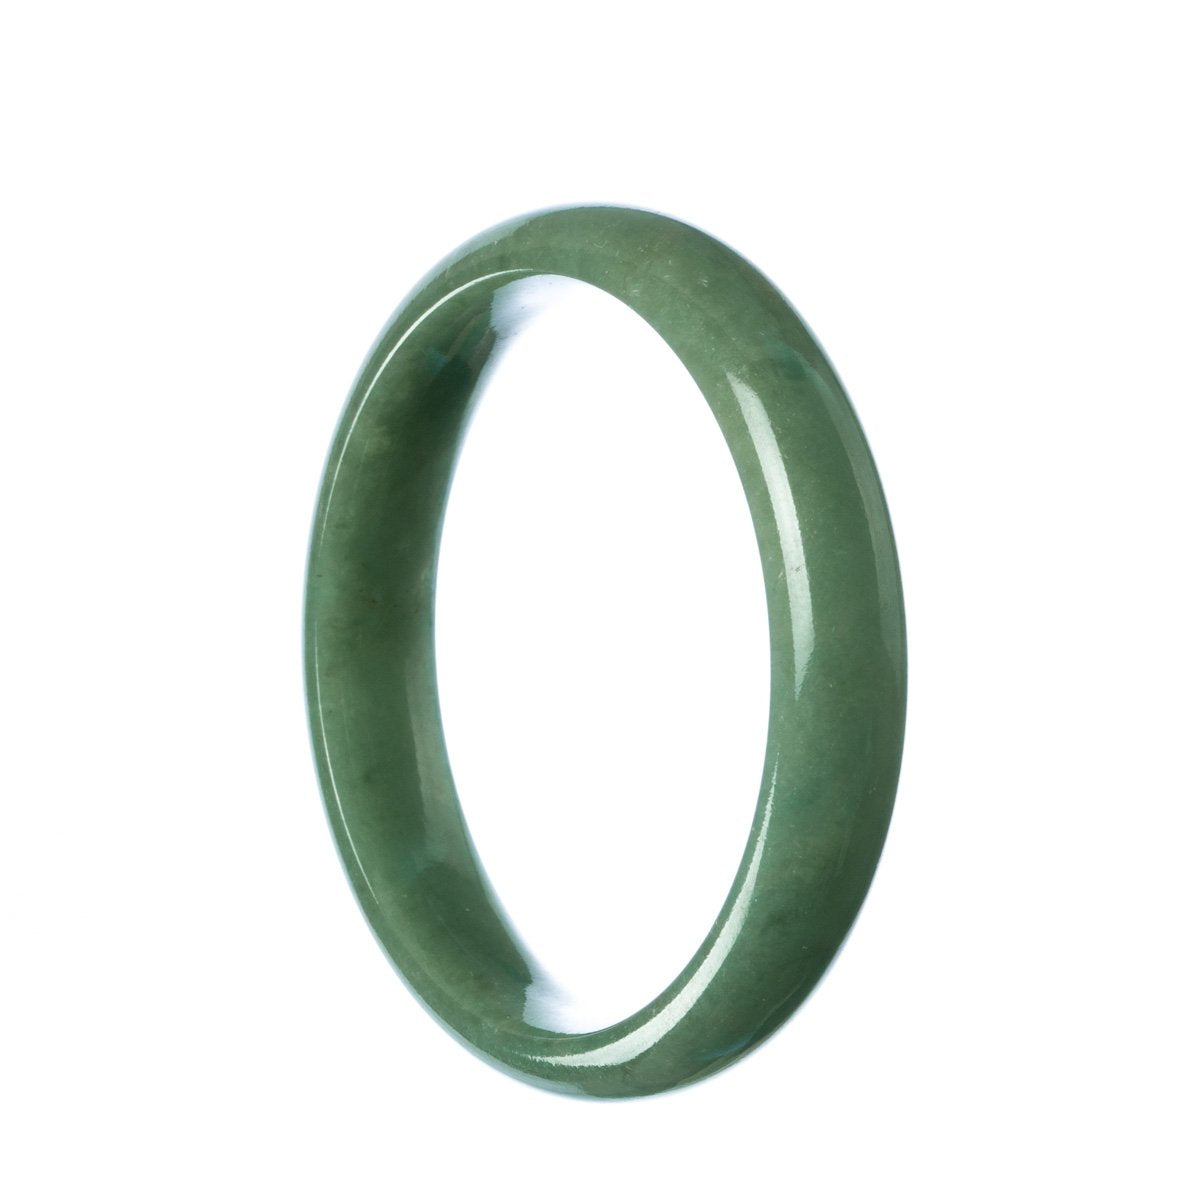 A close-up image of a green jade bangle bracelet, half moon shaped, with a certification label.